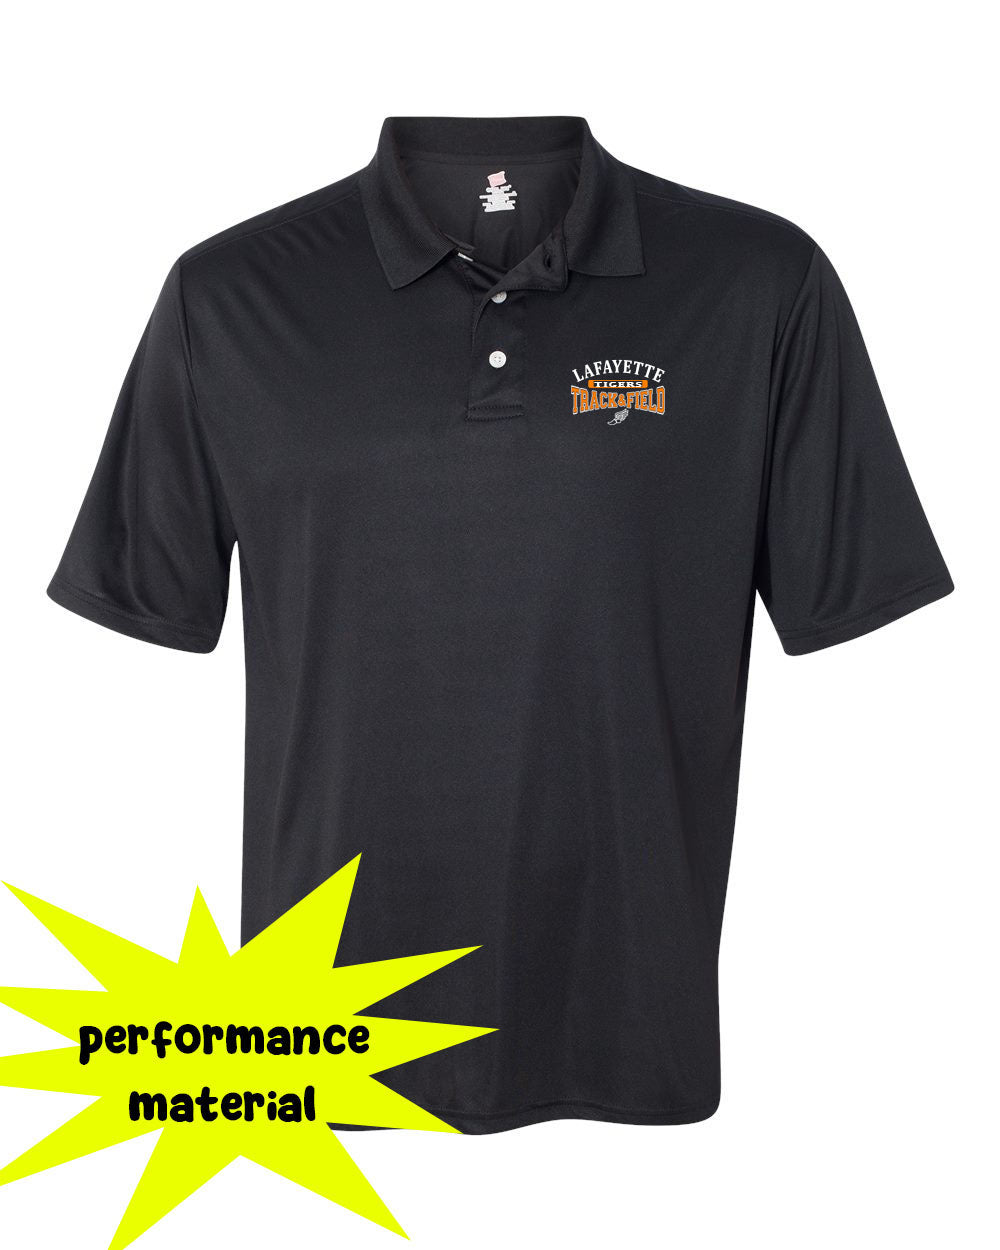 Lafayette Track Performance Material Polo T-Shirt Design 2